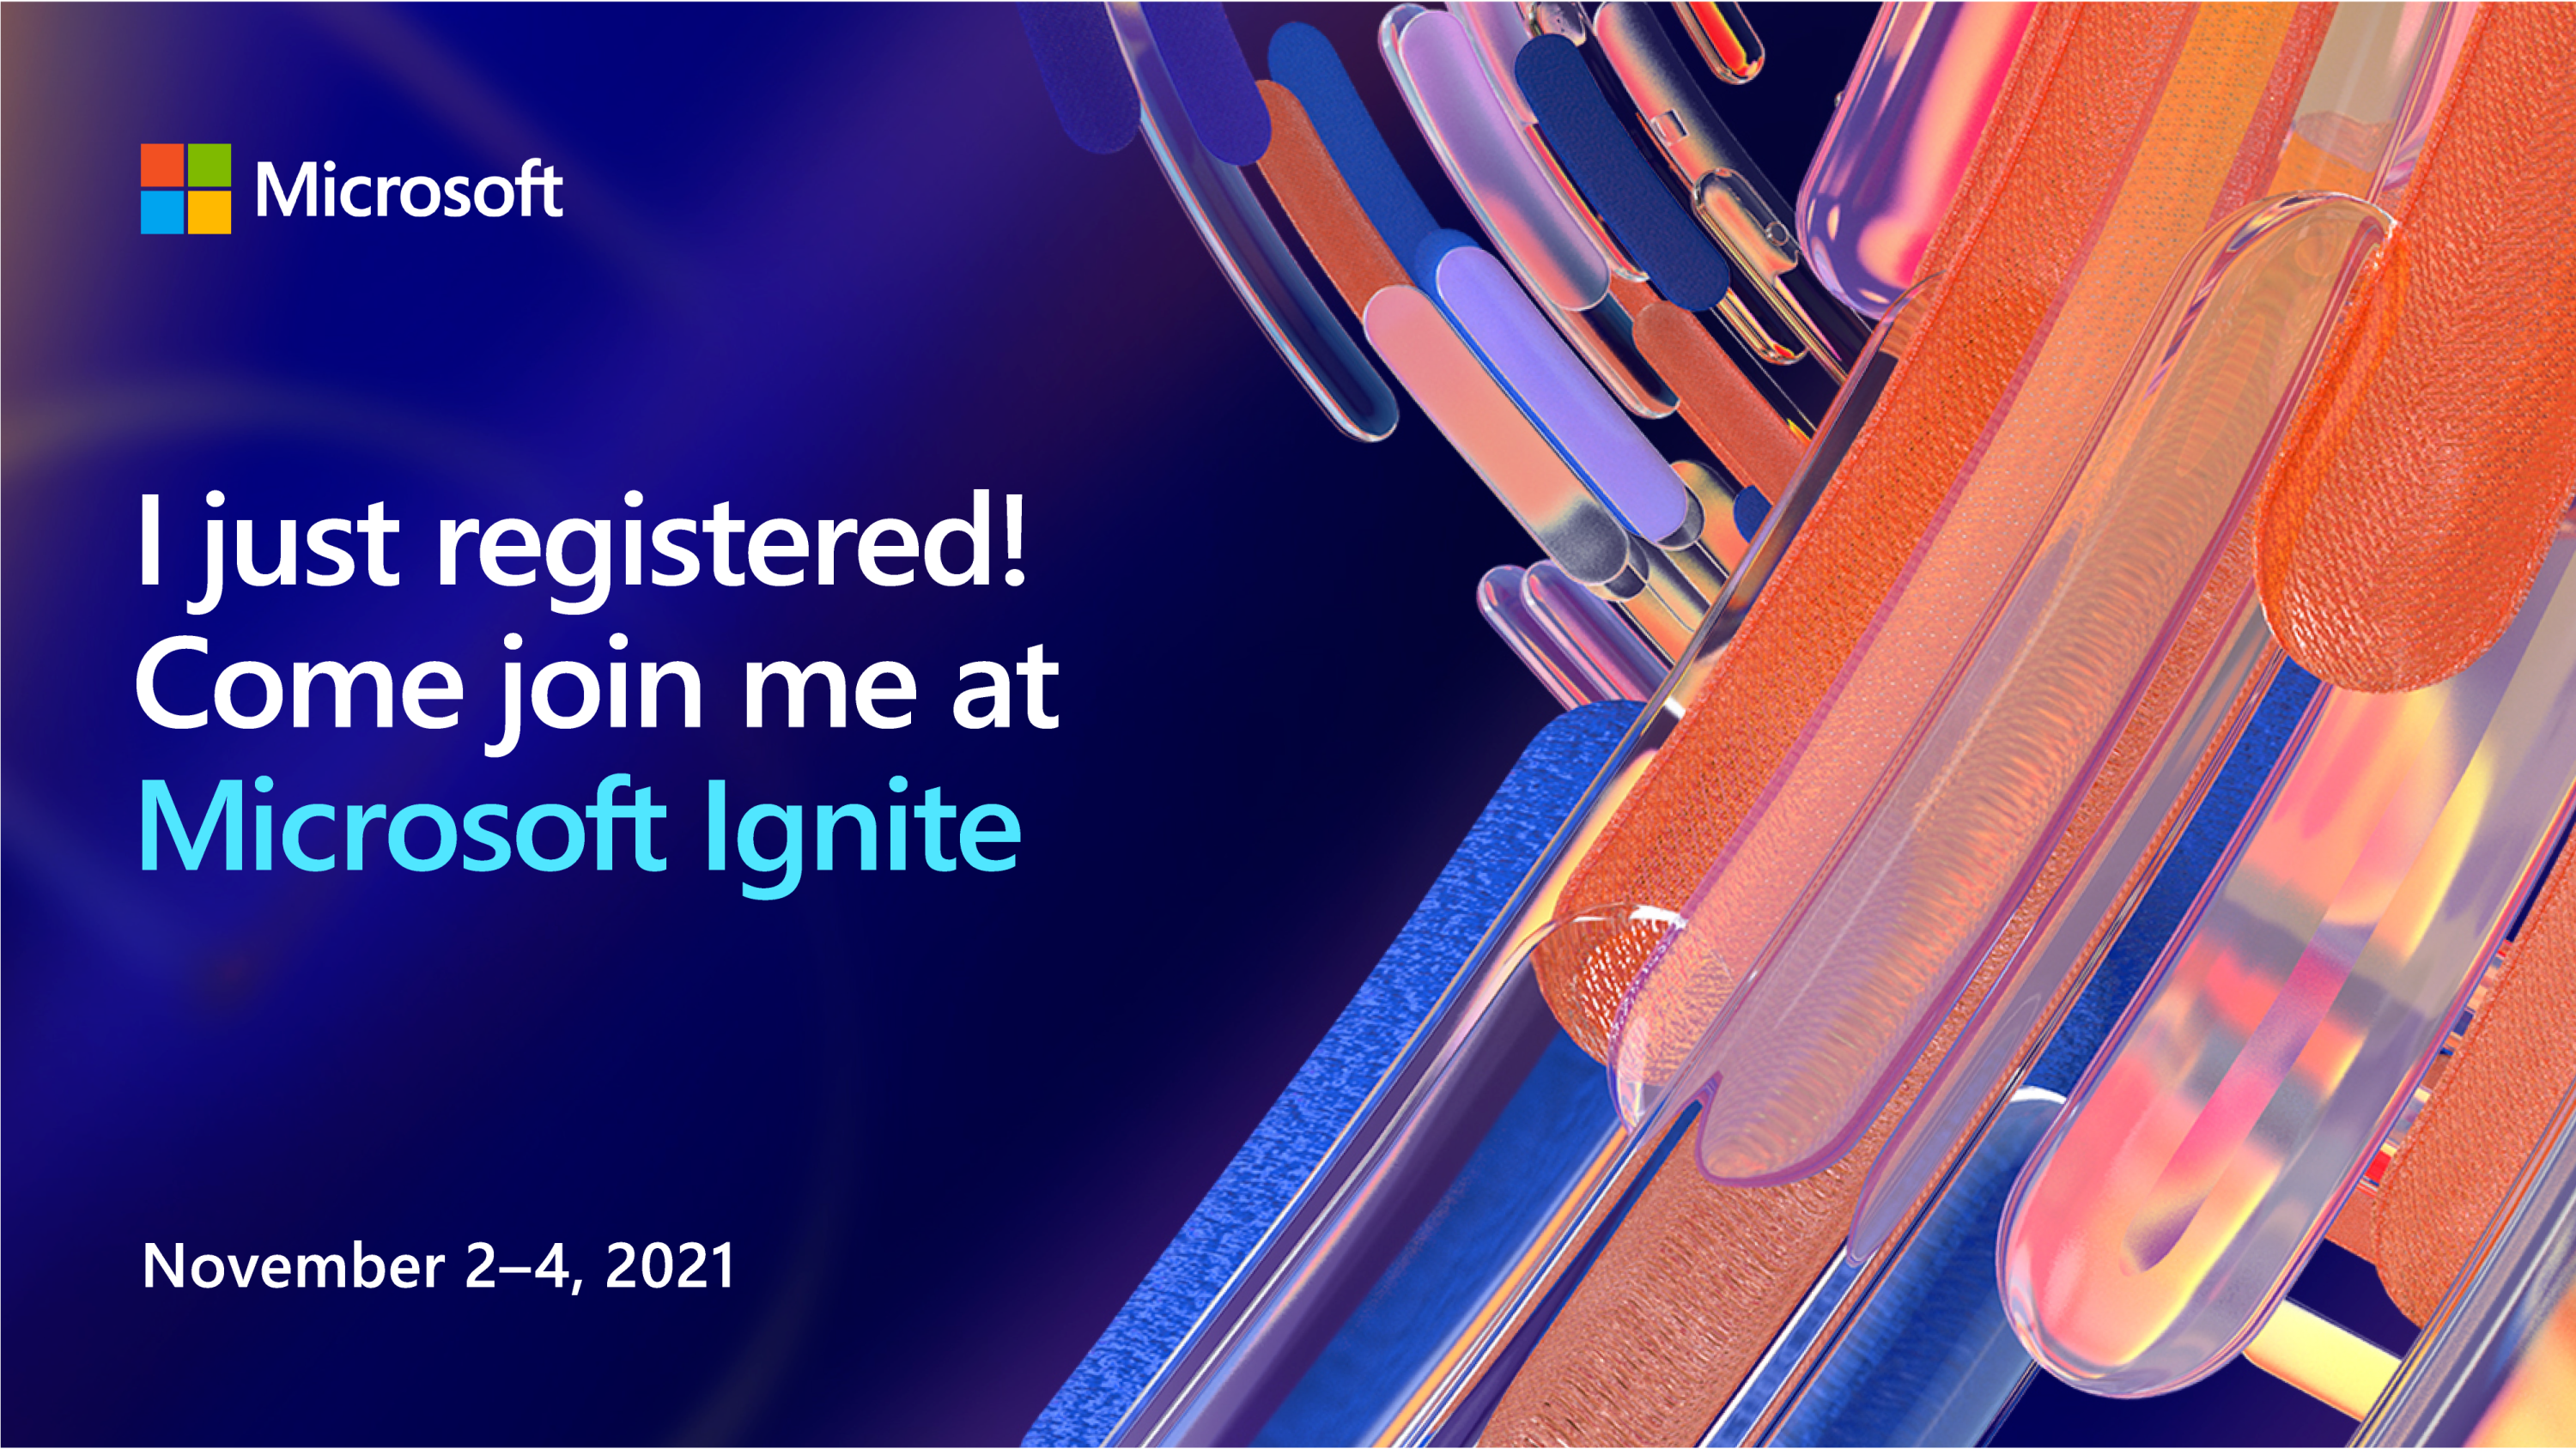 I just registered for Microsoft Ignite. Join me by clicking here.